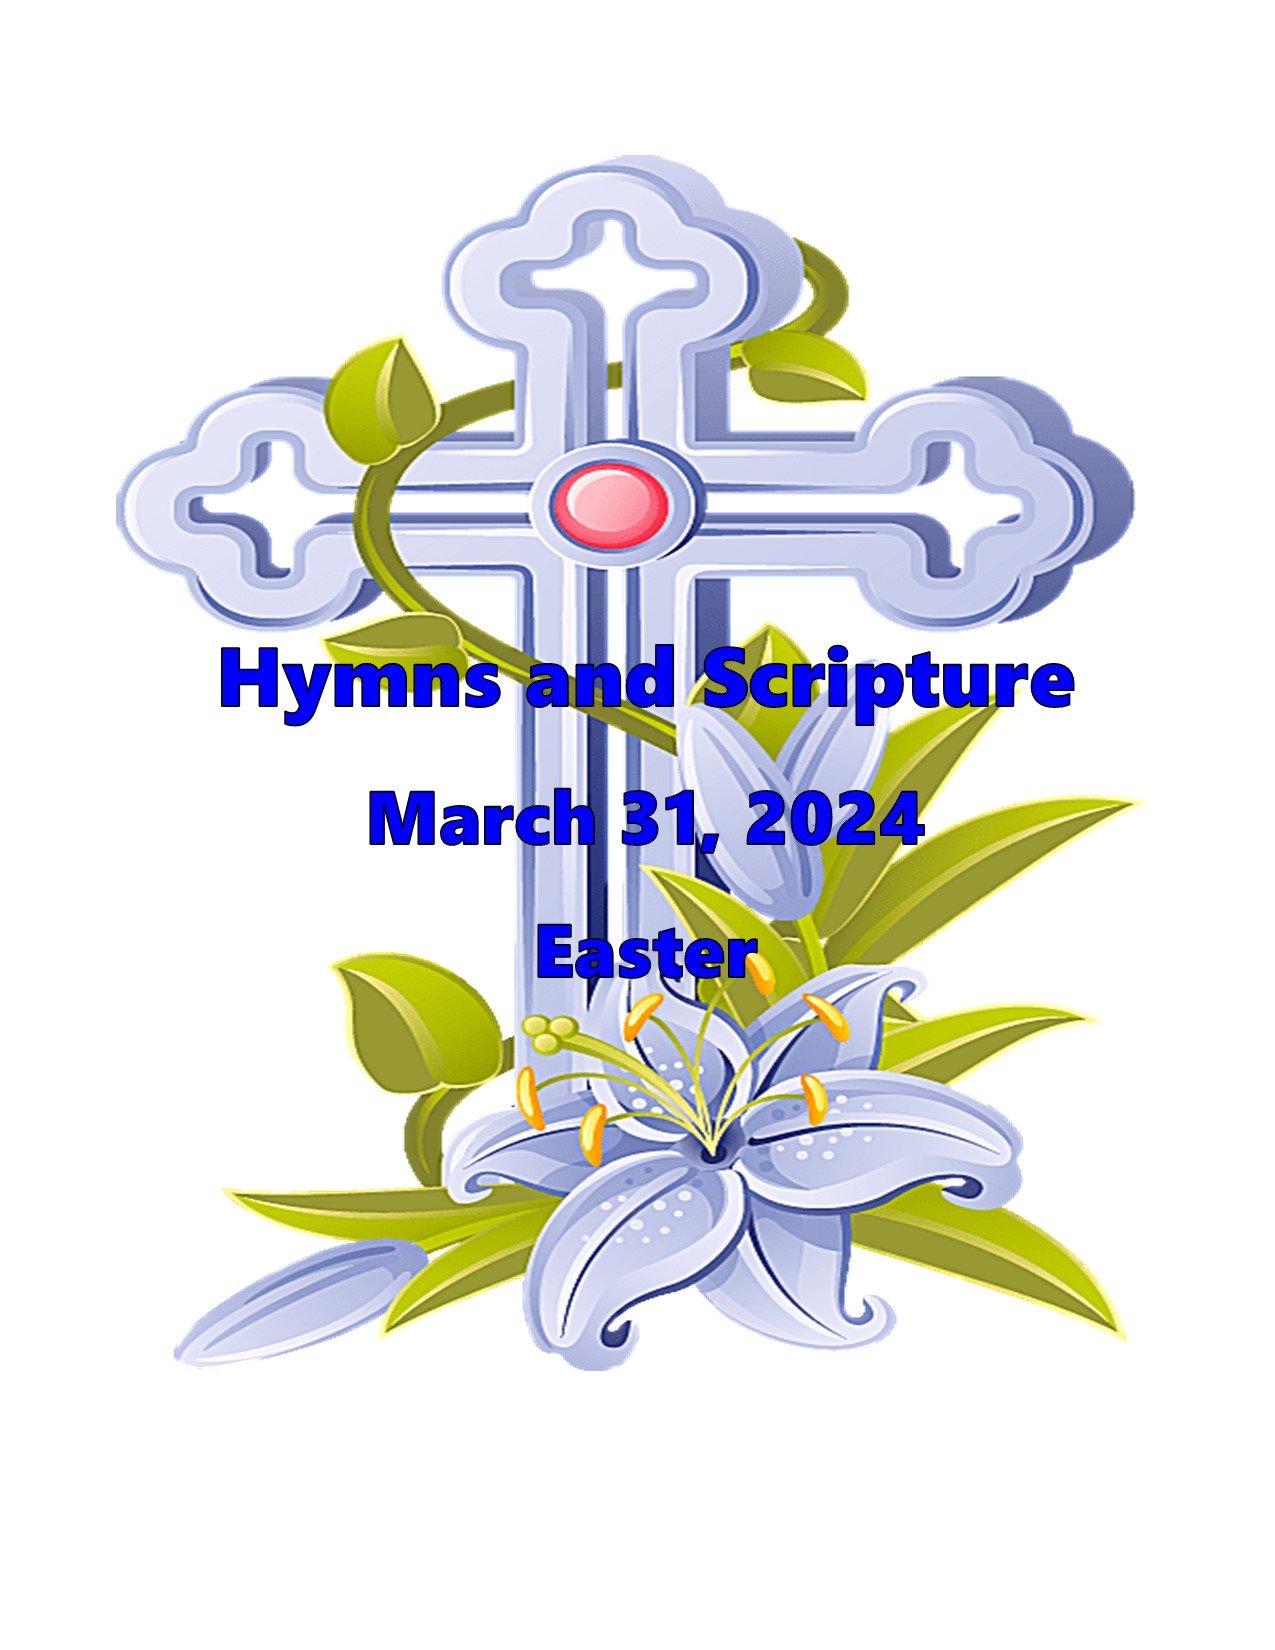 a Button - Hymns and Scripture Mar 31 2024.jpg